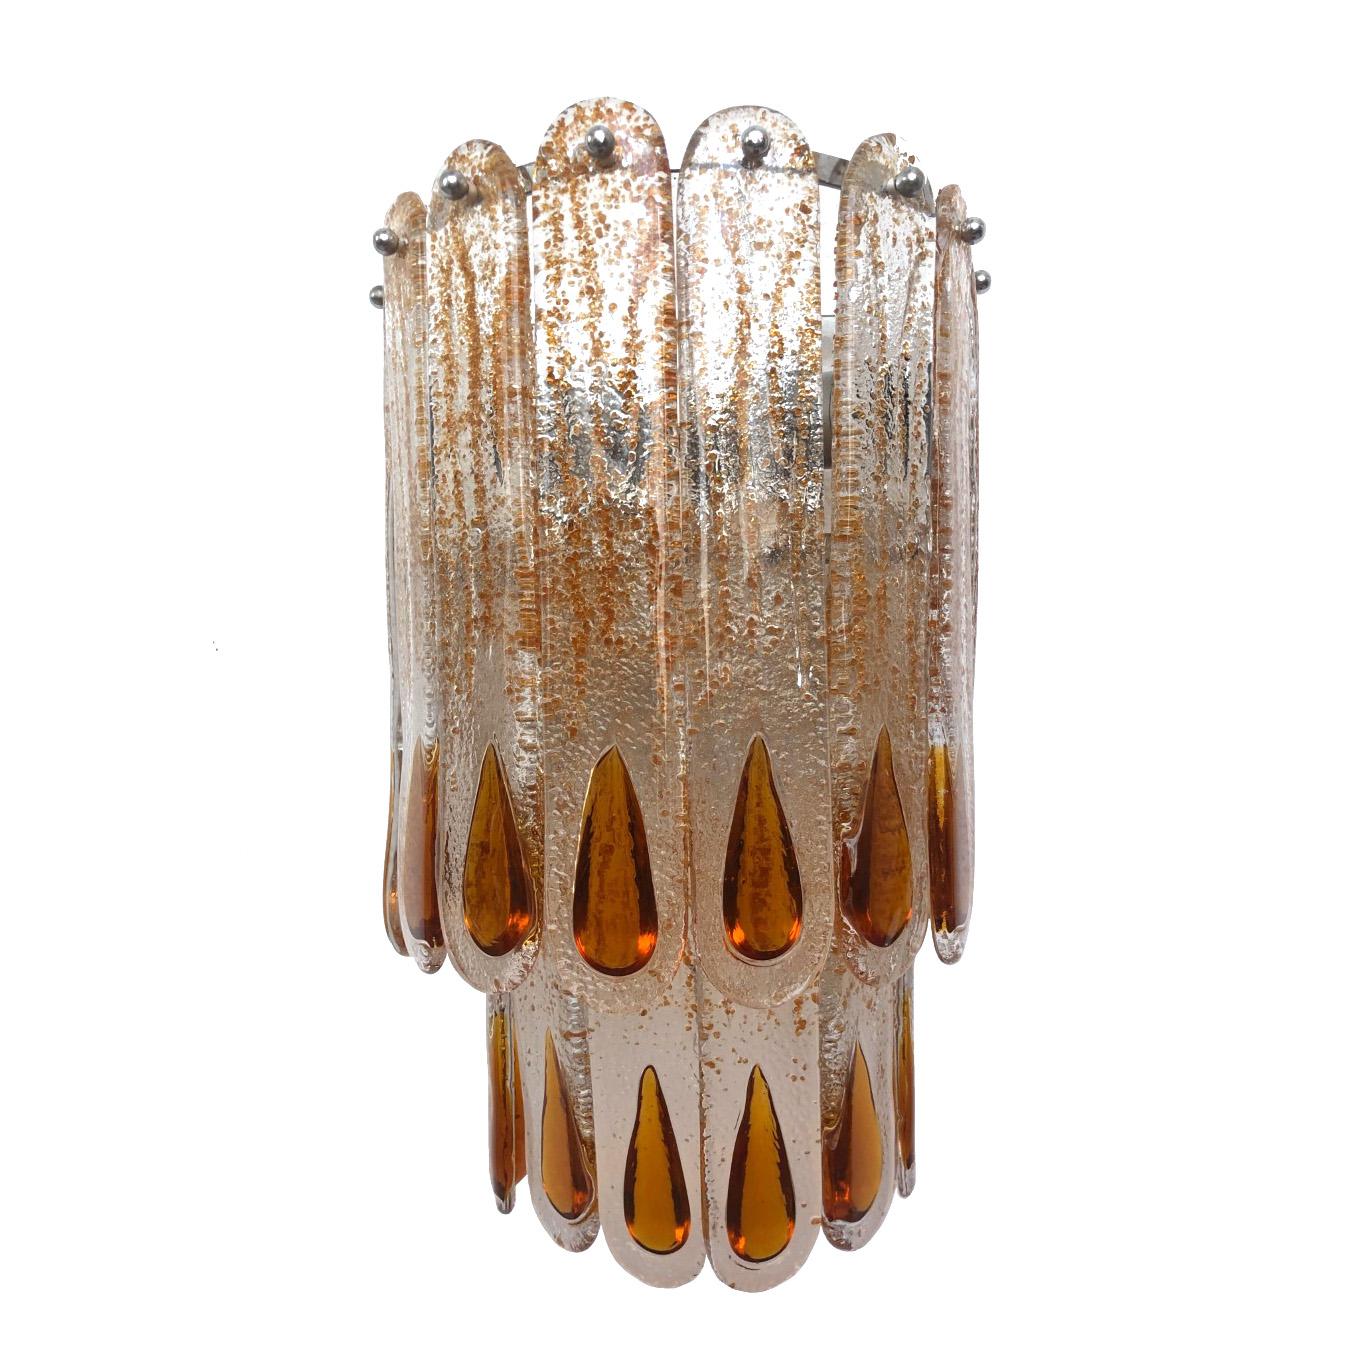 Marvelous and huge pair of Italian amber Murano glass wall sconces from 1970s.
These sconces were made during the 1970s in Italy for the Venice Company “Mazzega”.
Each wall sconce is composed by 14 units of Murano glasses (H 11.81 in. 30 cm x W